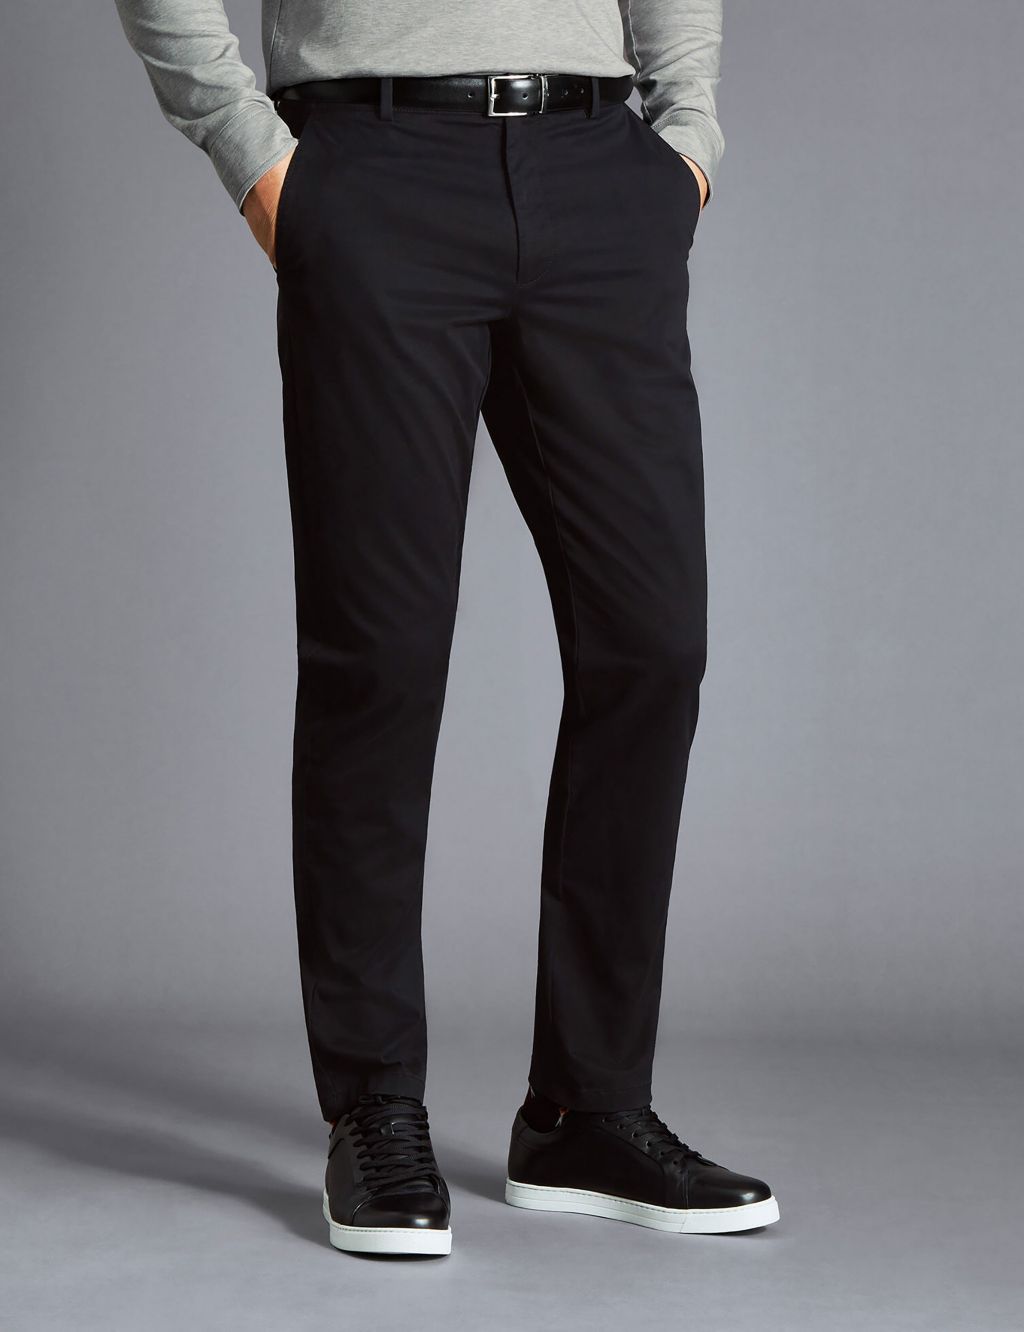 Slim Fit Lightweight Flat Front Trousers image 1